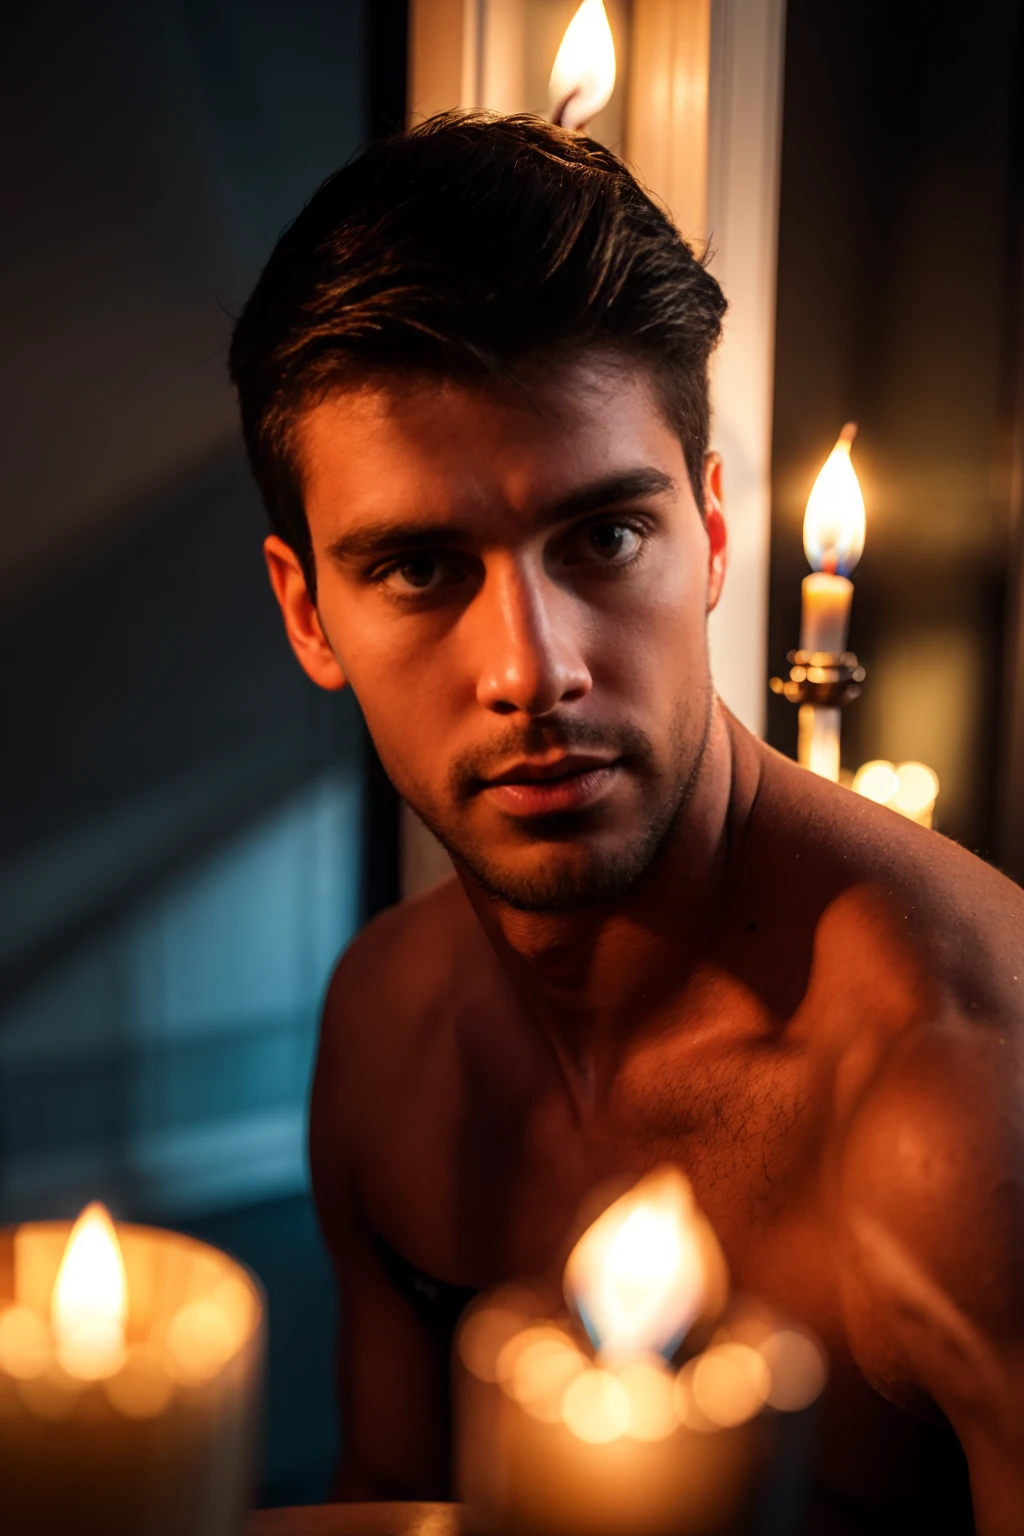 Handsome guy with blue steel eyes is sitting in a completely dark room. There's a lit candle 30 centimeters away from his face, illuminating his beautiful features. Photorealistic style. 8k resolution. Very detailed.